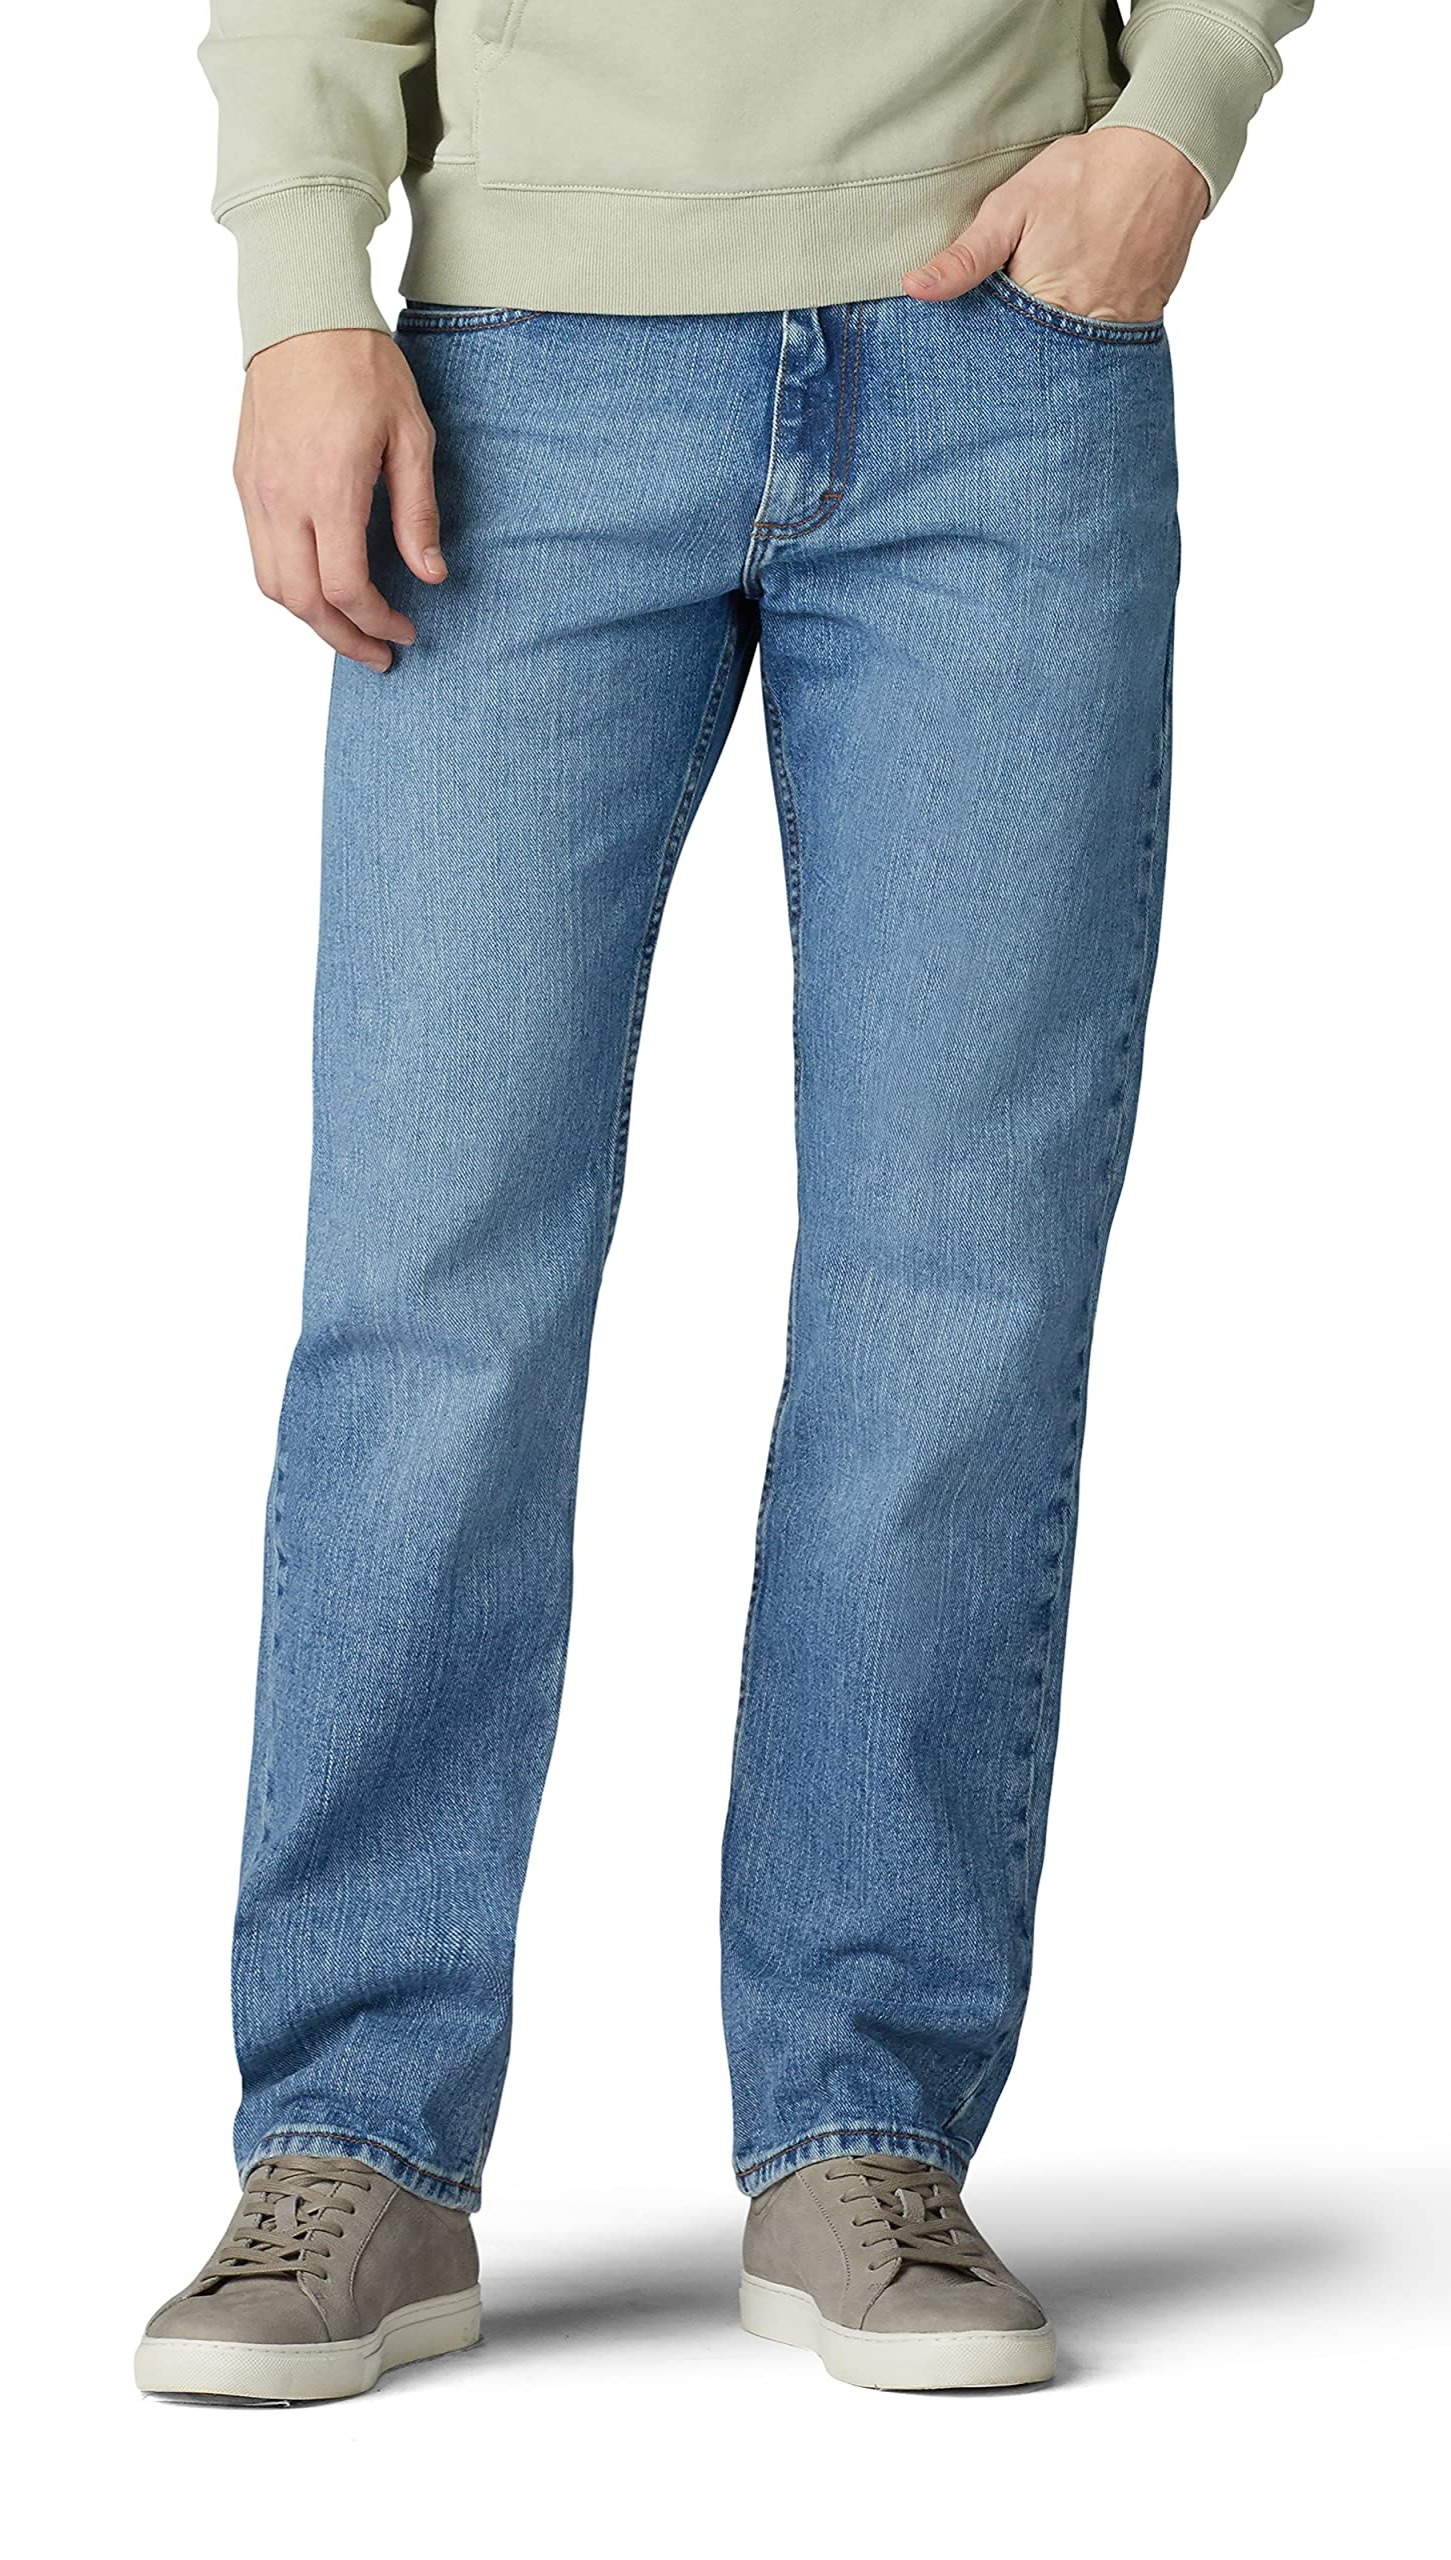 Lee Men's Regular Fit Straight Leg Jean (Various Colors) $19.95 + Free Shipping w/ Prime or on $35+